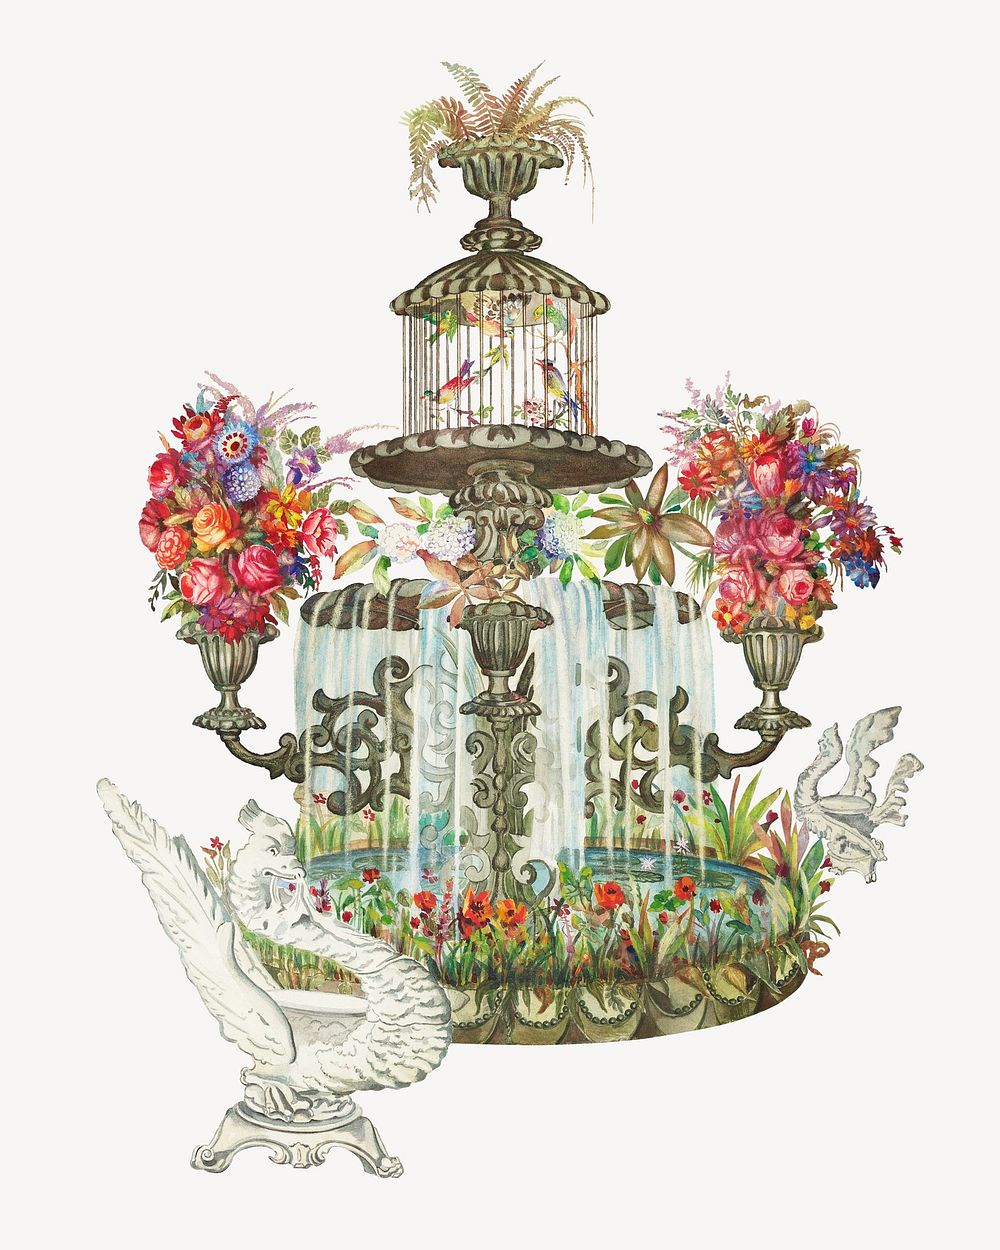 Conservatory Fountain, vintage garden illustration by Perkins Harnly and Nicholas Zupa. Remixed by rawpixel.